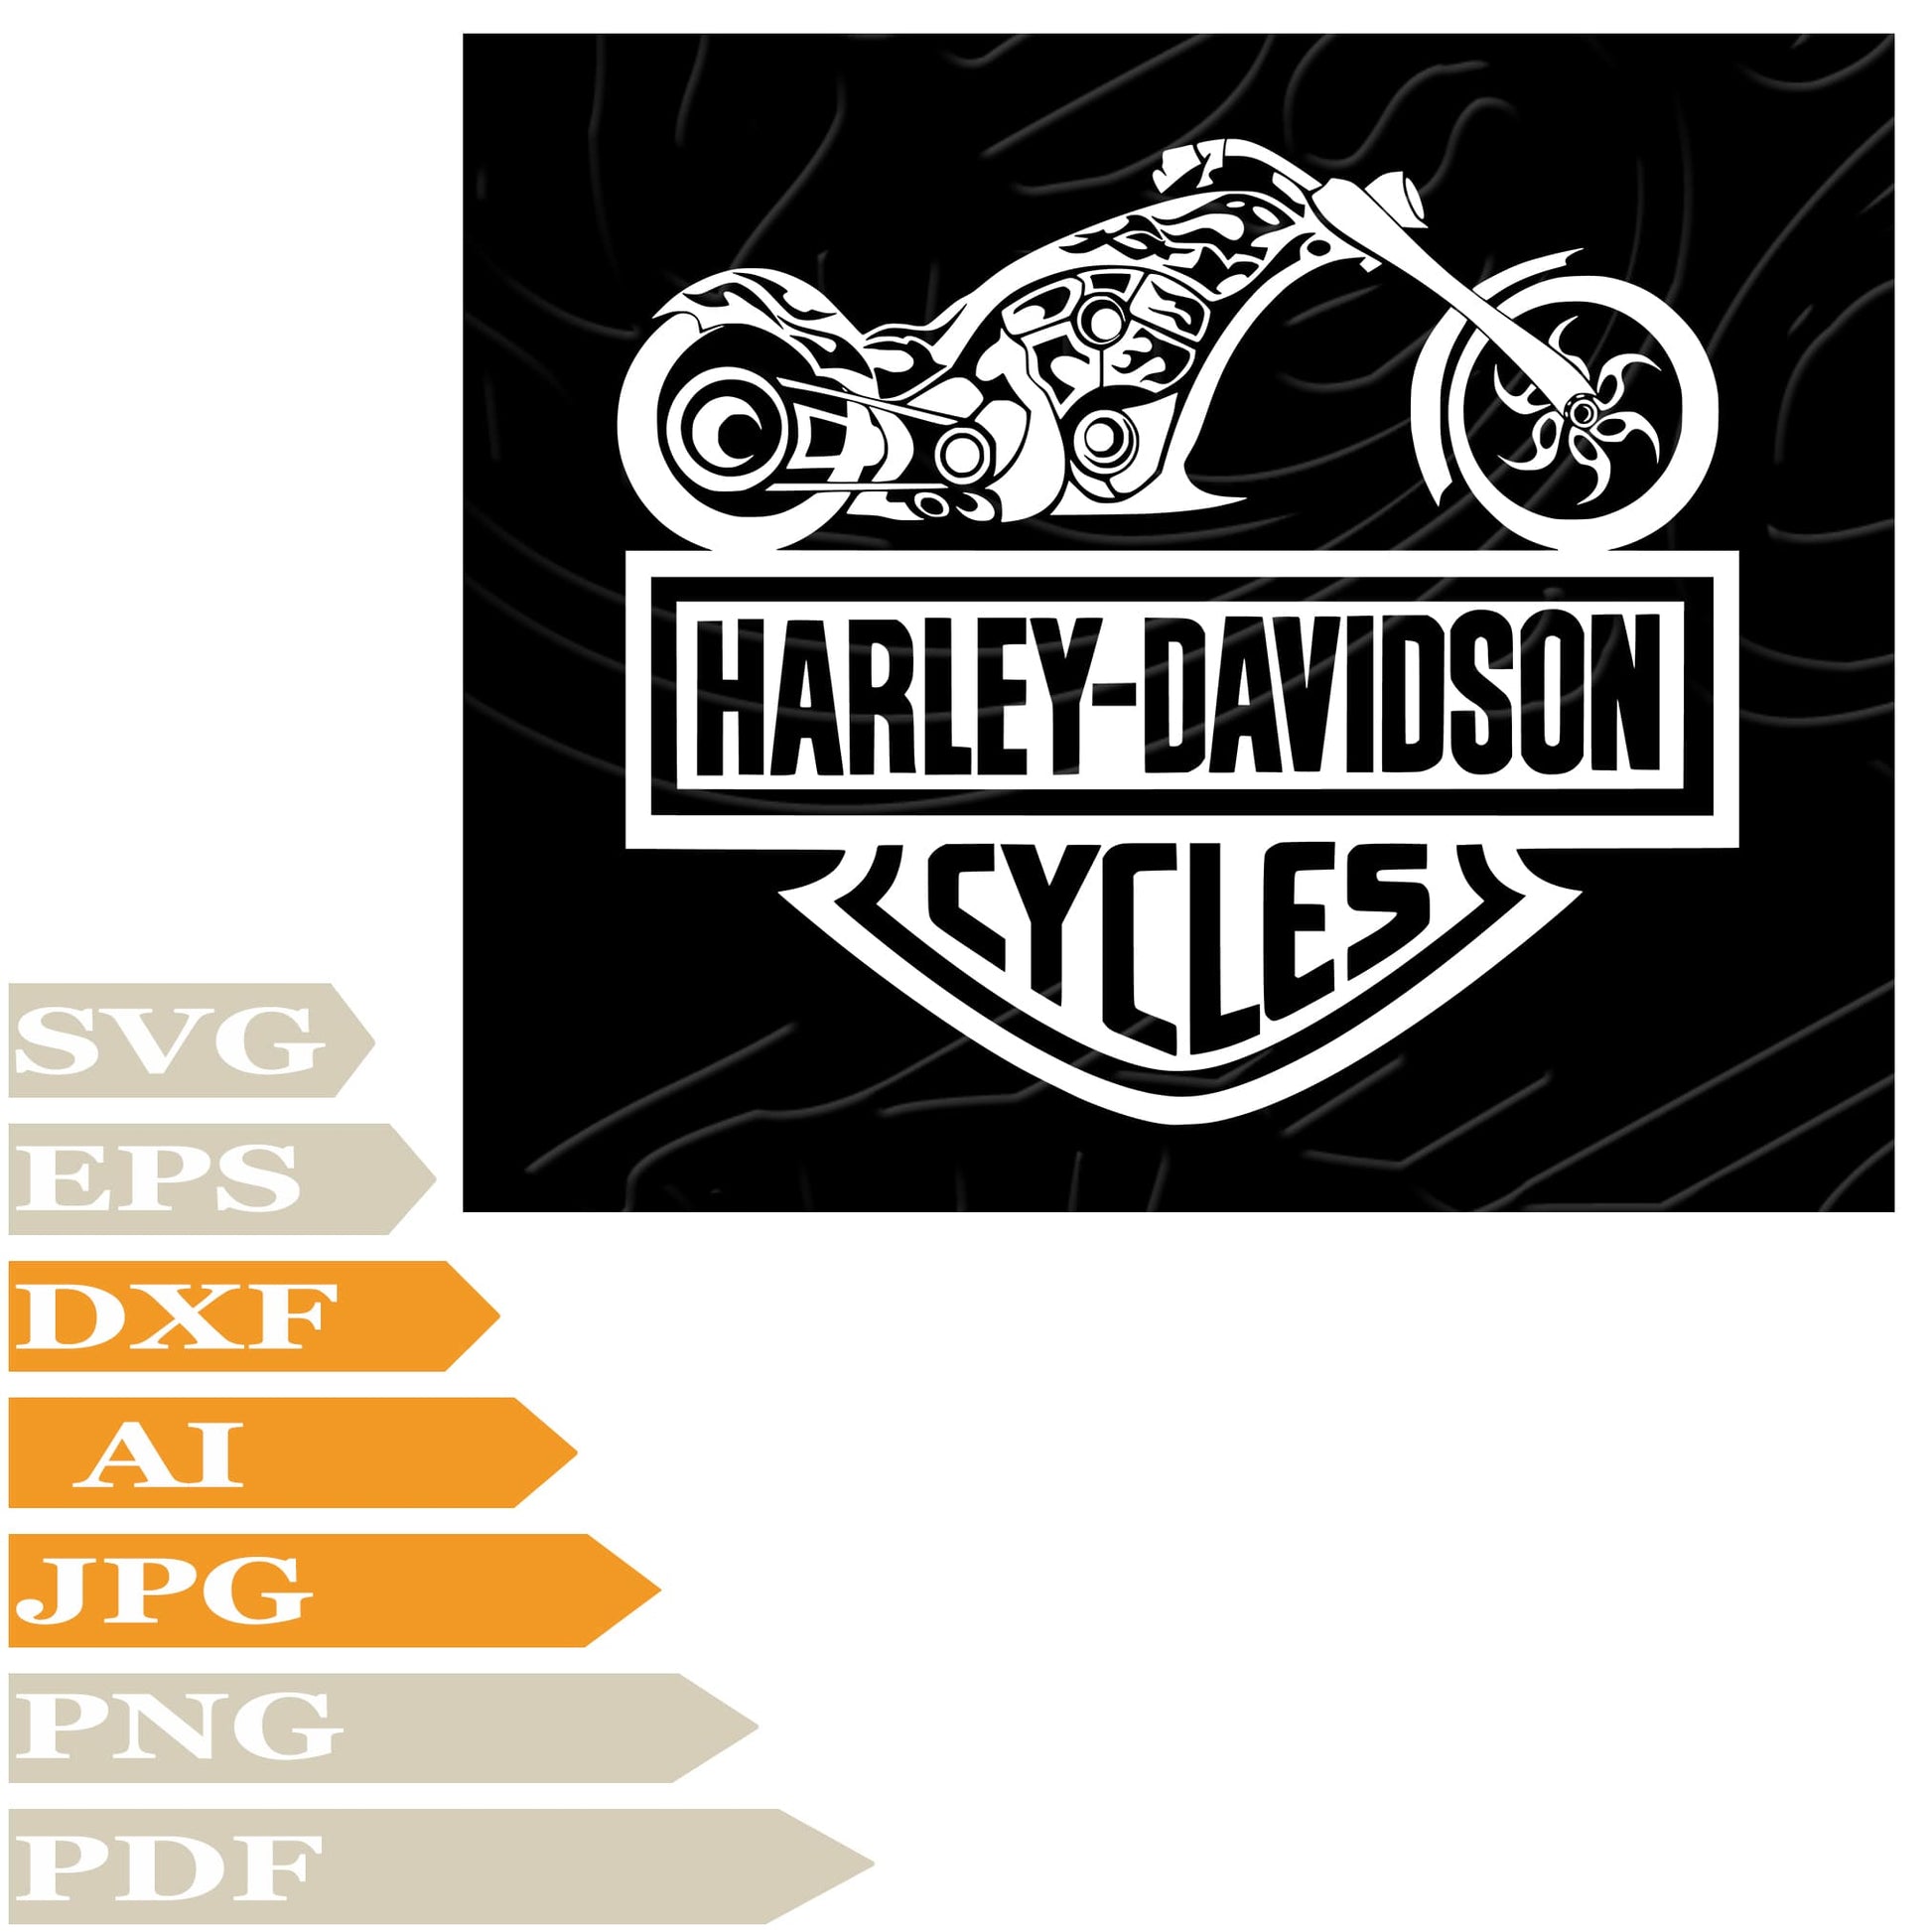 Sofvintage-Motorcycles SVG File,Motorcycles Harley Davidson Logo SVG Design,Harley Davidson Logo SVG Drawing,Motorcycles Harley Davidson Logo PNG,Harley Davidson Logo Vector Graphics,Harley Davidson Logo For Cricut,Motorcycles Harley Davidson Clip art,Harley Davidson Logo Image Cut,Motorcycles Harley Davidson T-Shirt,Motorcycles Wall Sticker,Motorcycles Harley Davidson Tattoo,Motorcycles Silhouette